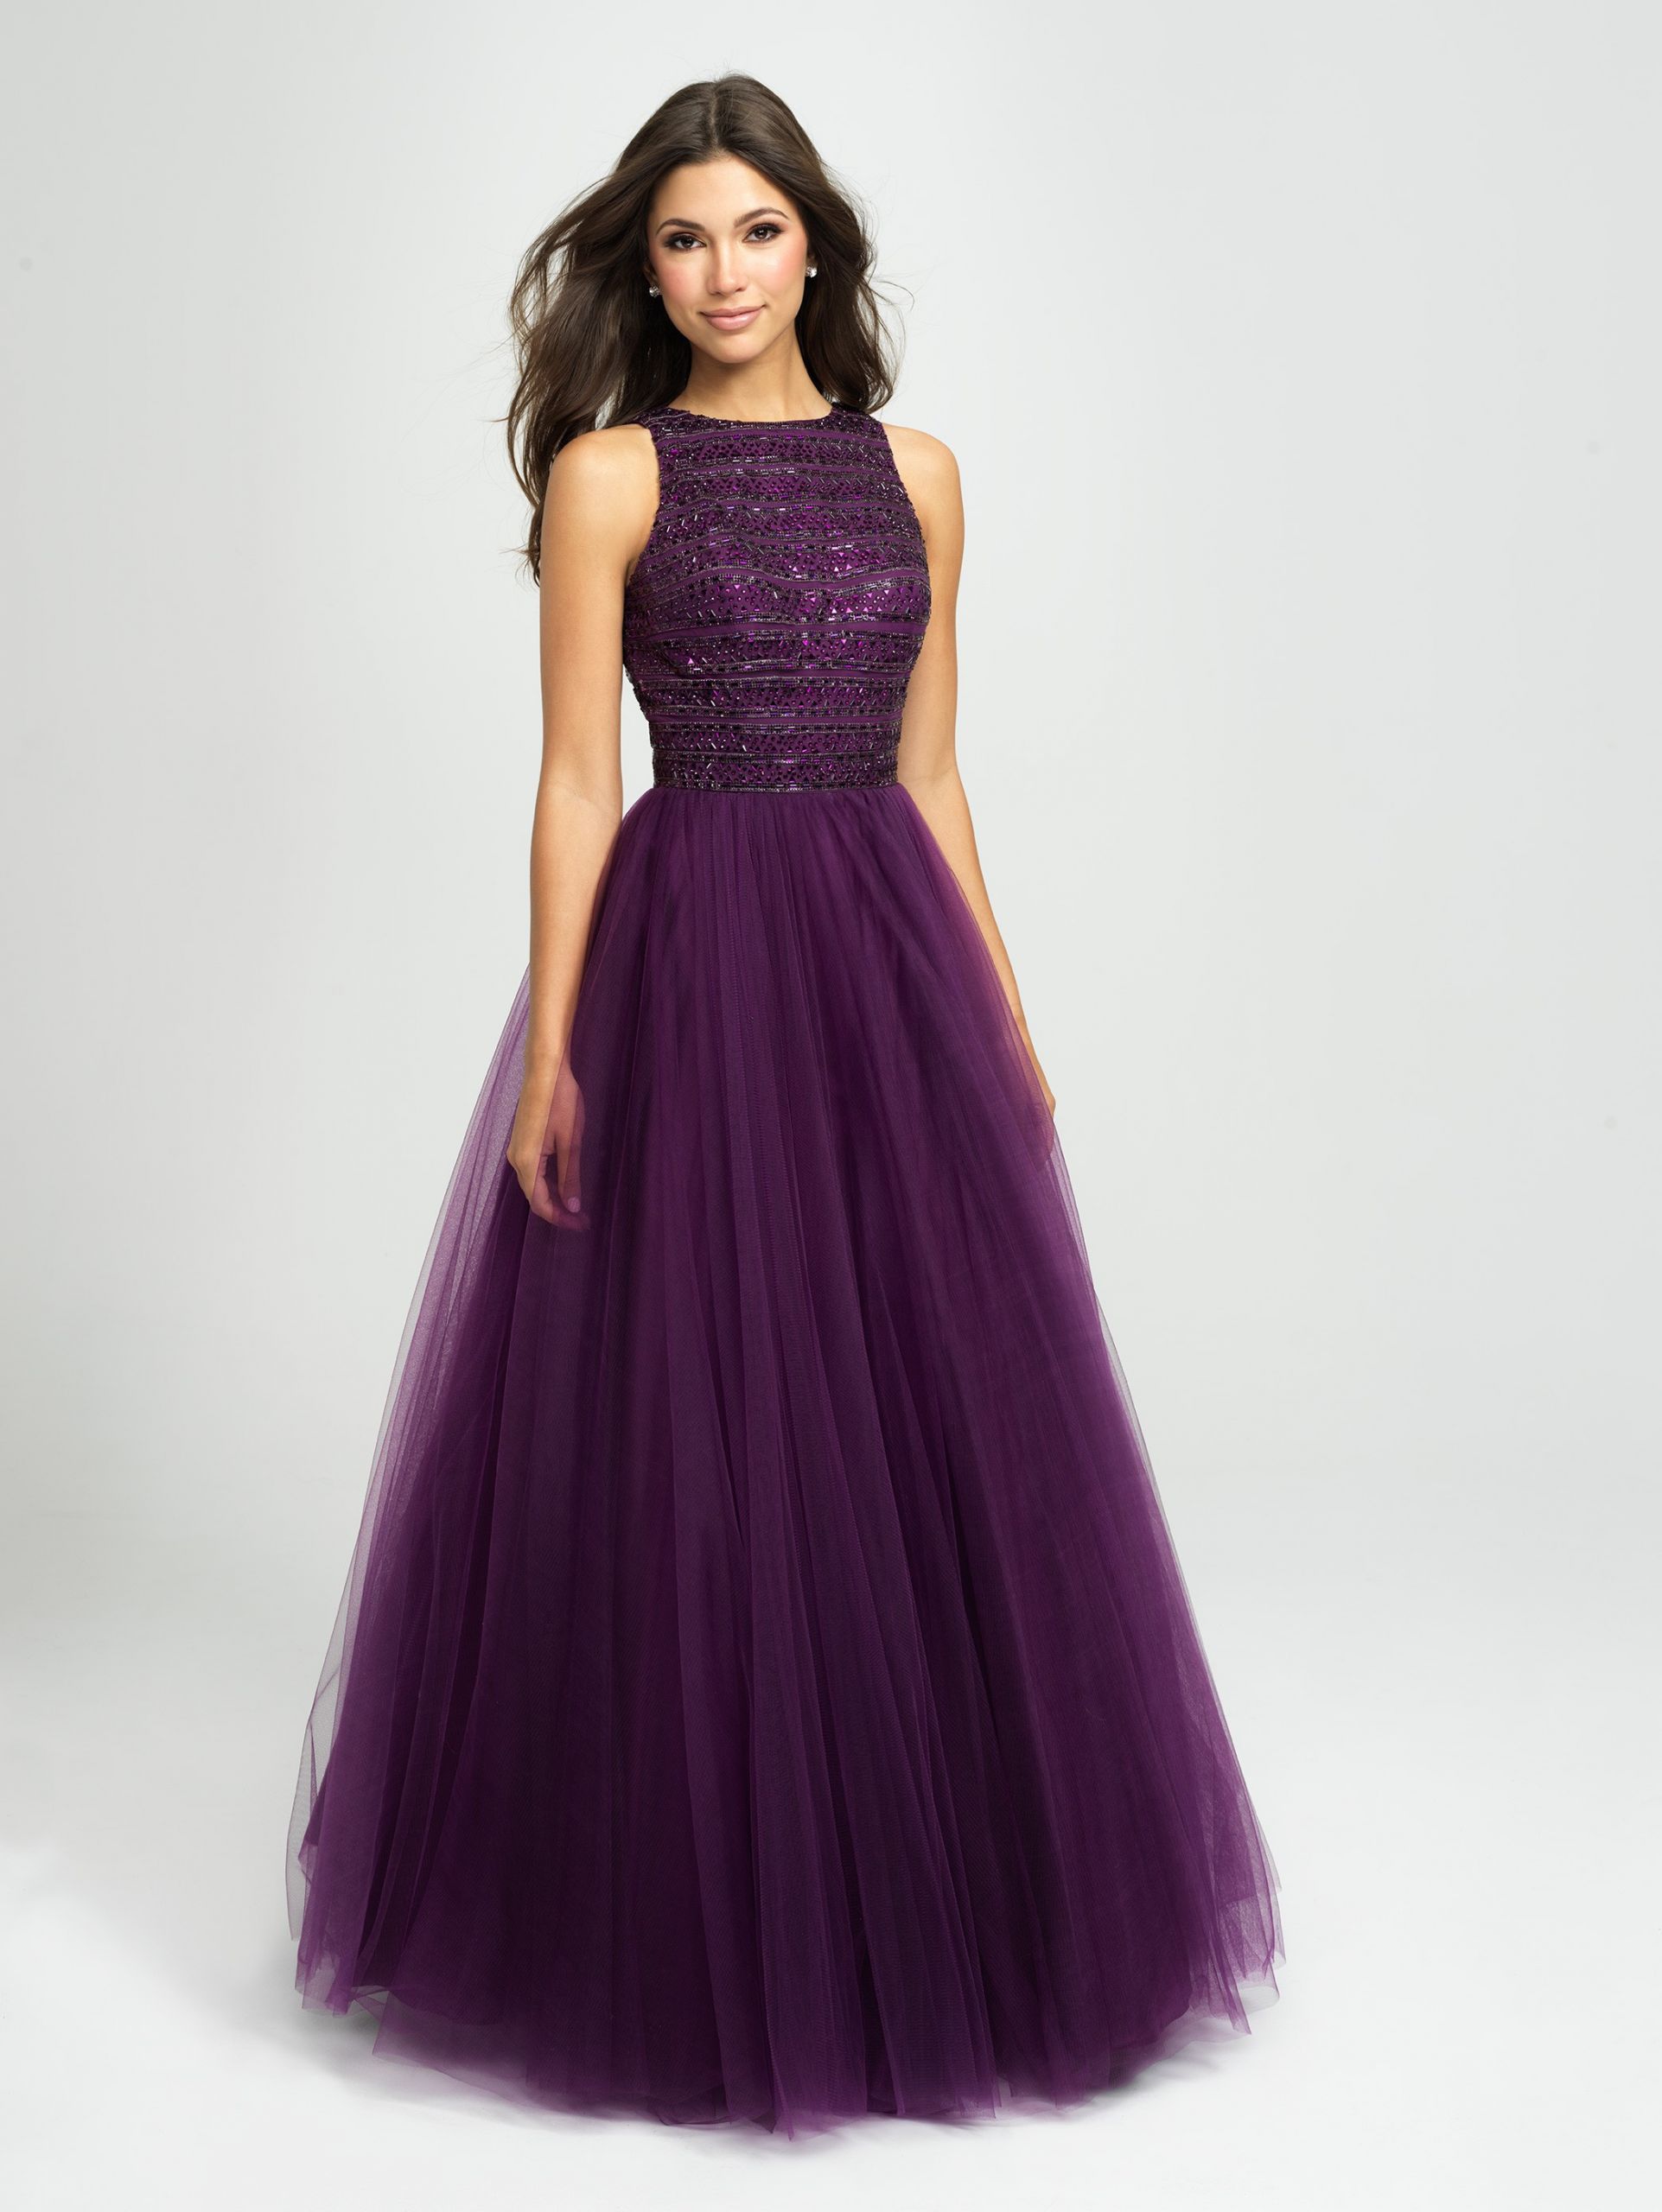 Purple Wedding Gown
 29 of the Best Colourful Wedding Dresses for 2019